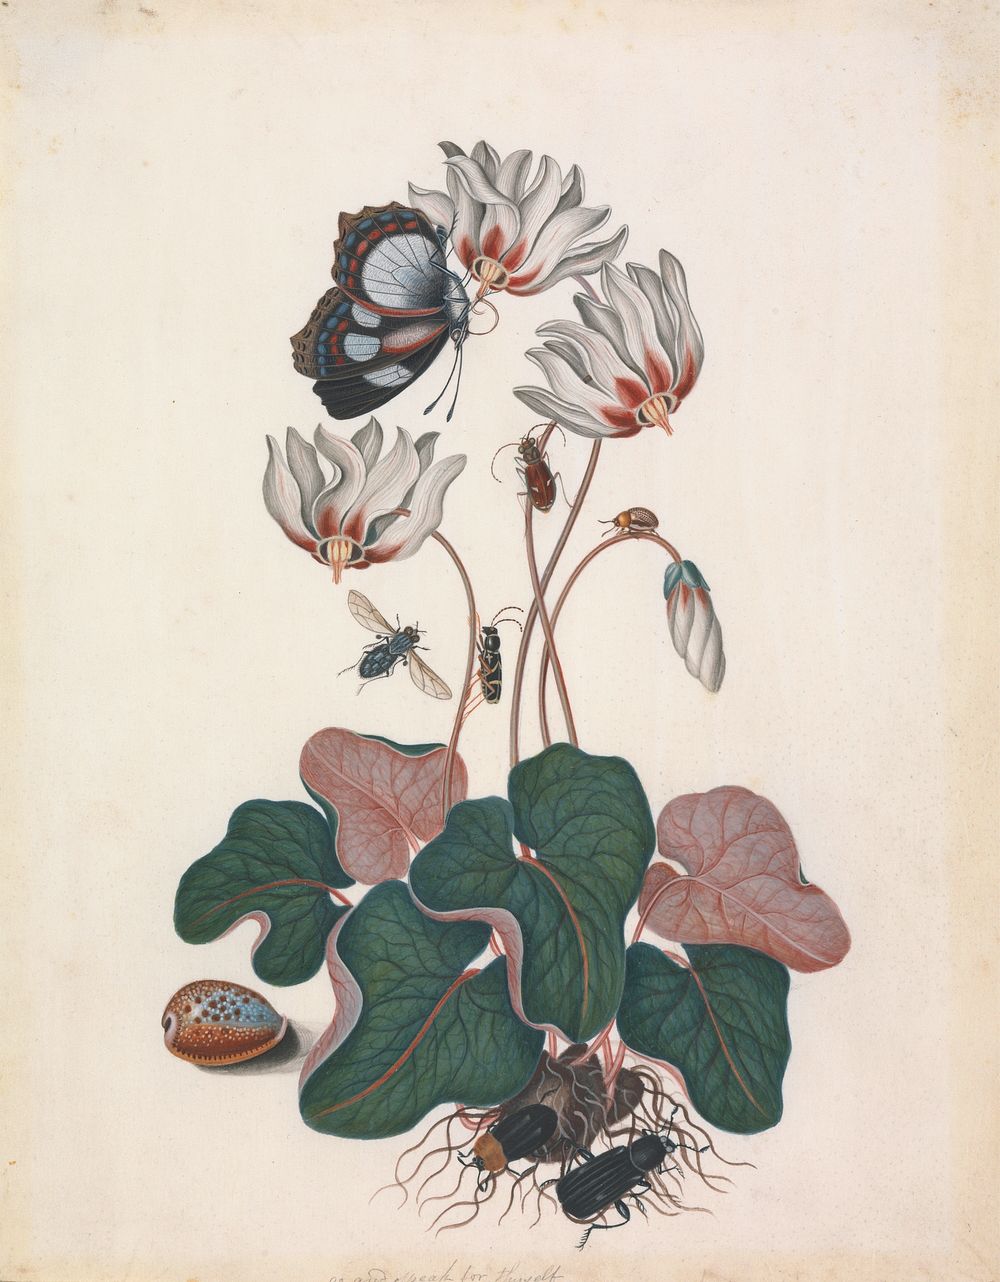 Cyclamen (cf. Cyclamen L.) and (Lepidoptera Nymphalidae Pyrrhogyra sp.), with Northern dune tiger beetle (Cicindela…